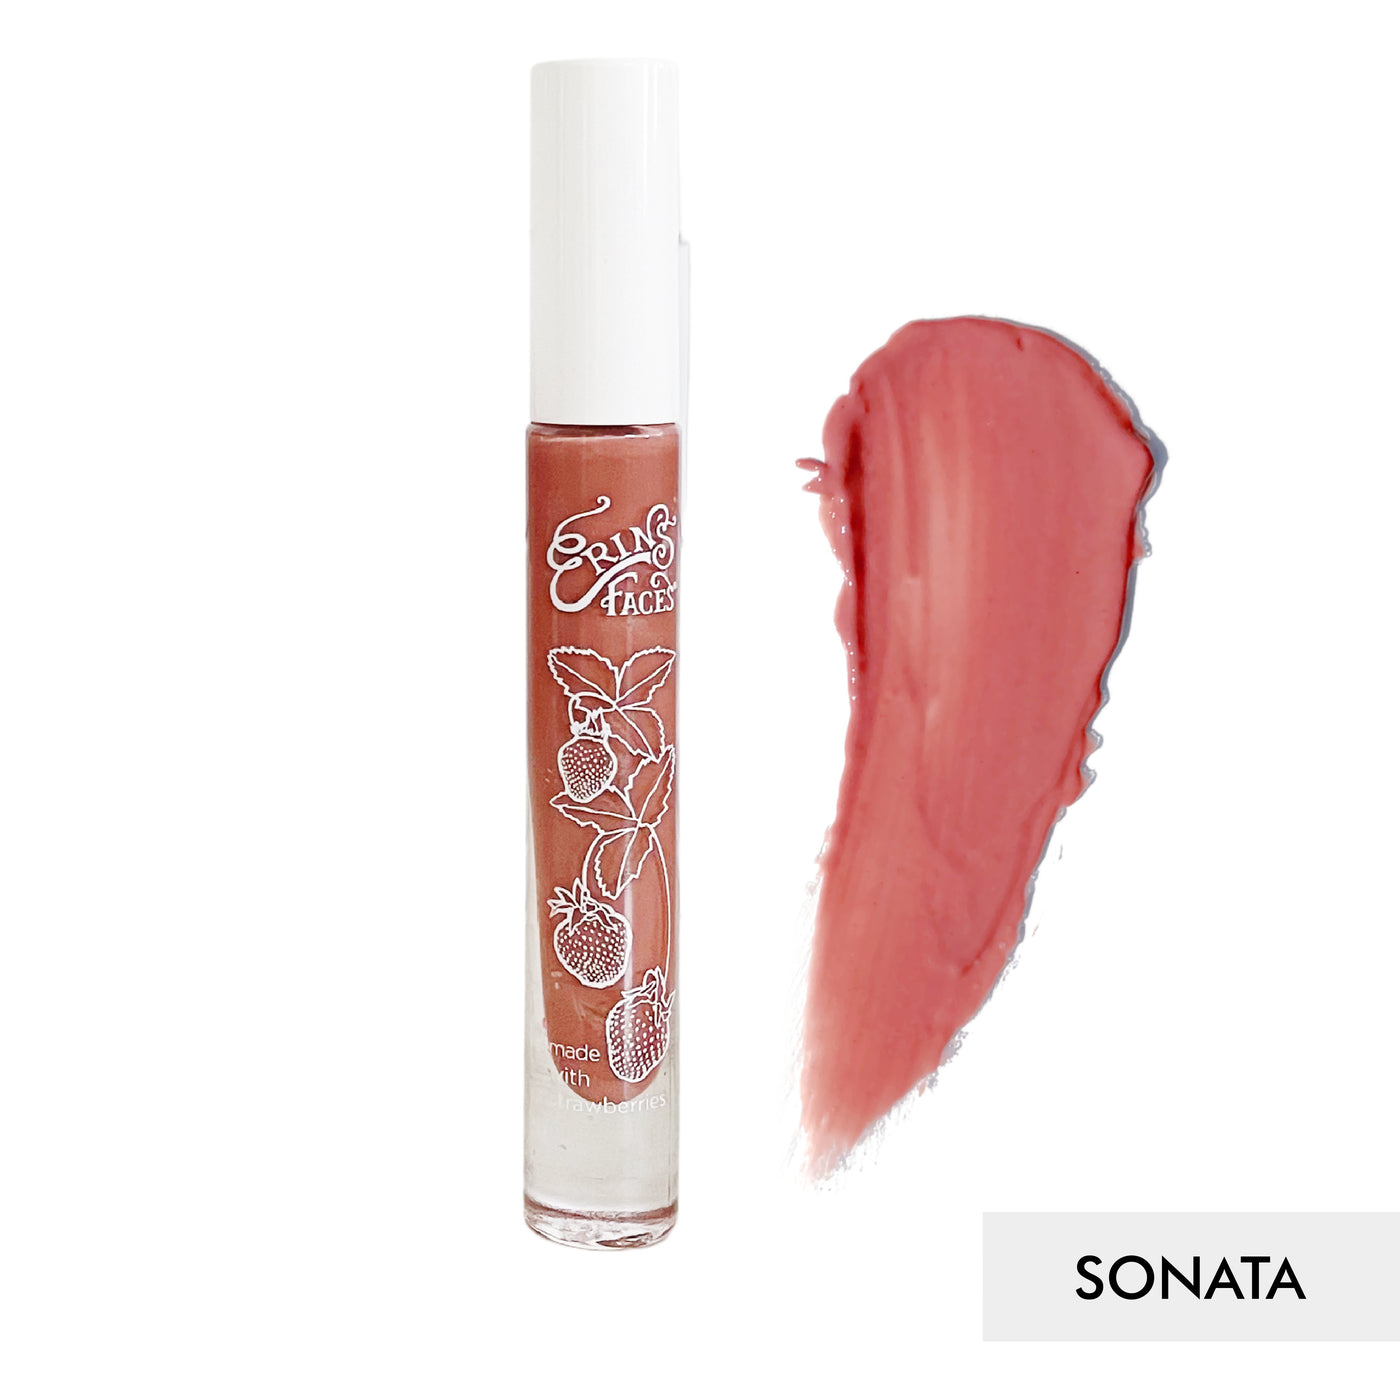 erin's faces fruit smoothie lip gloss bottle and swatch against white background of the shade sonata